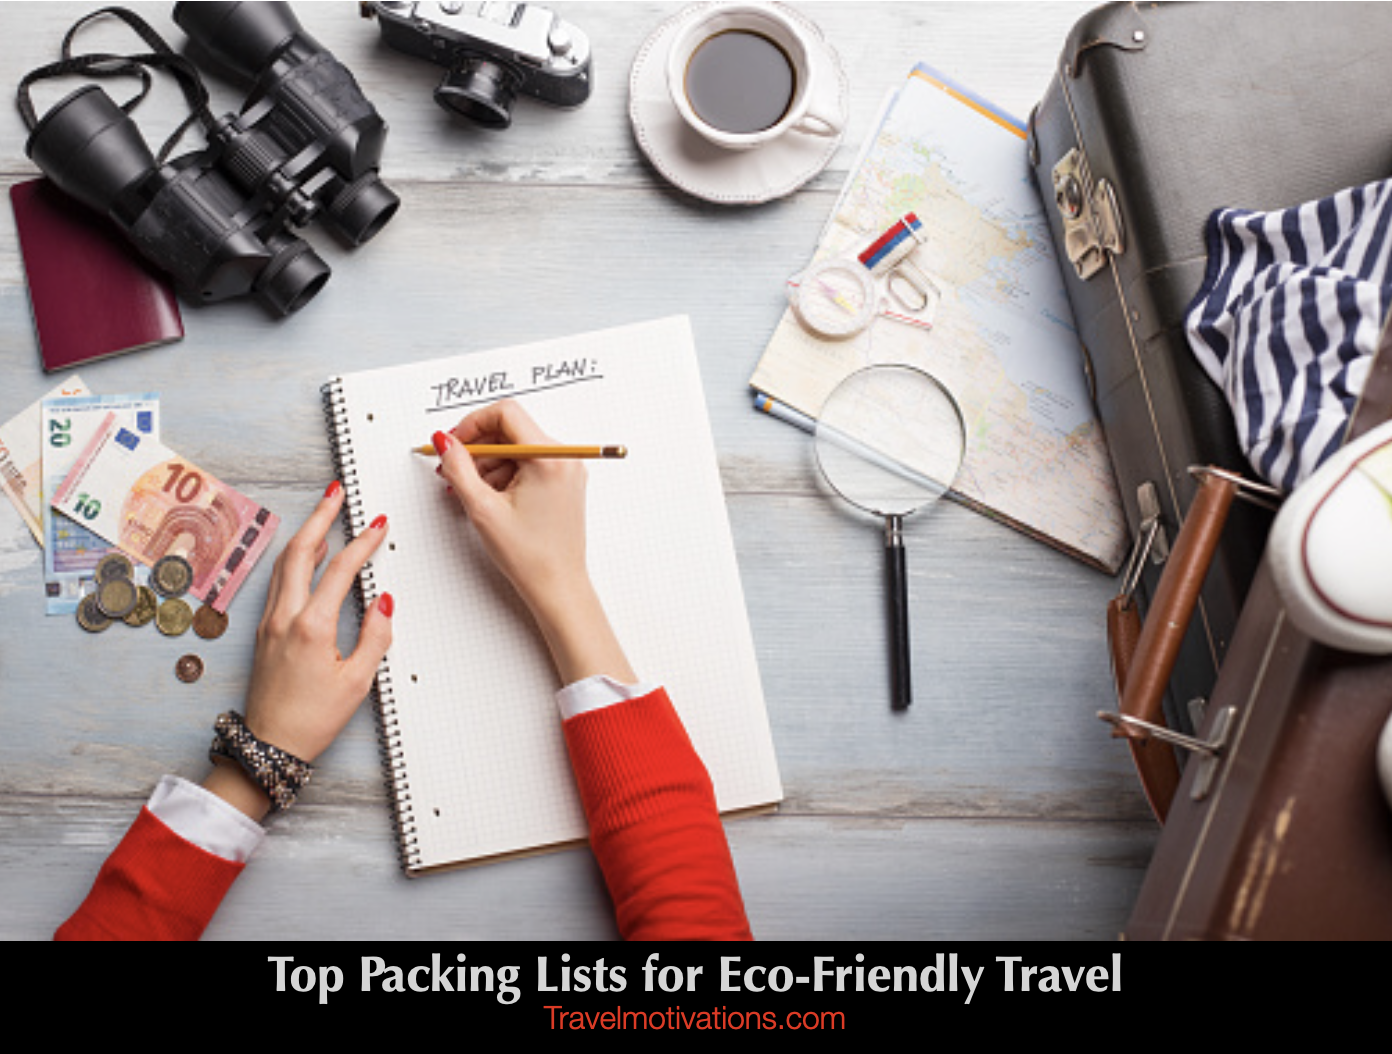 Top Packing Tips For Eco-Friendly Travel